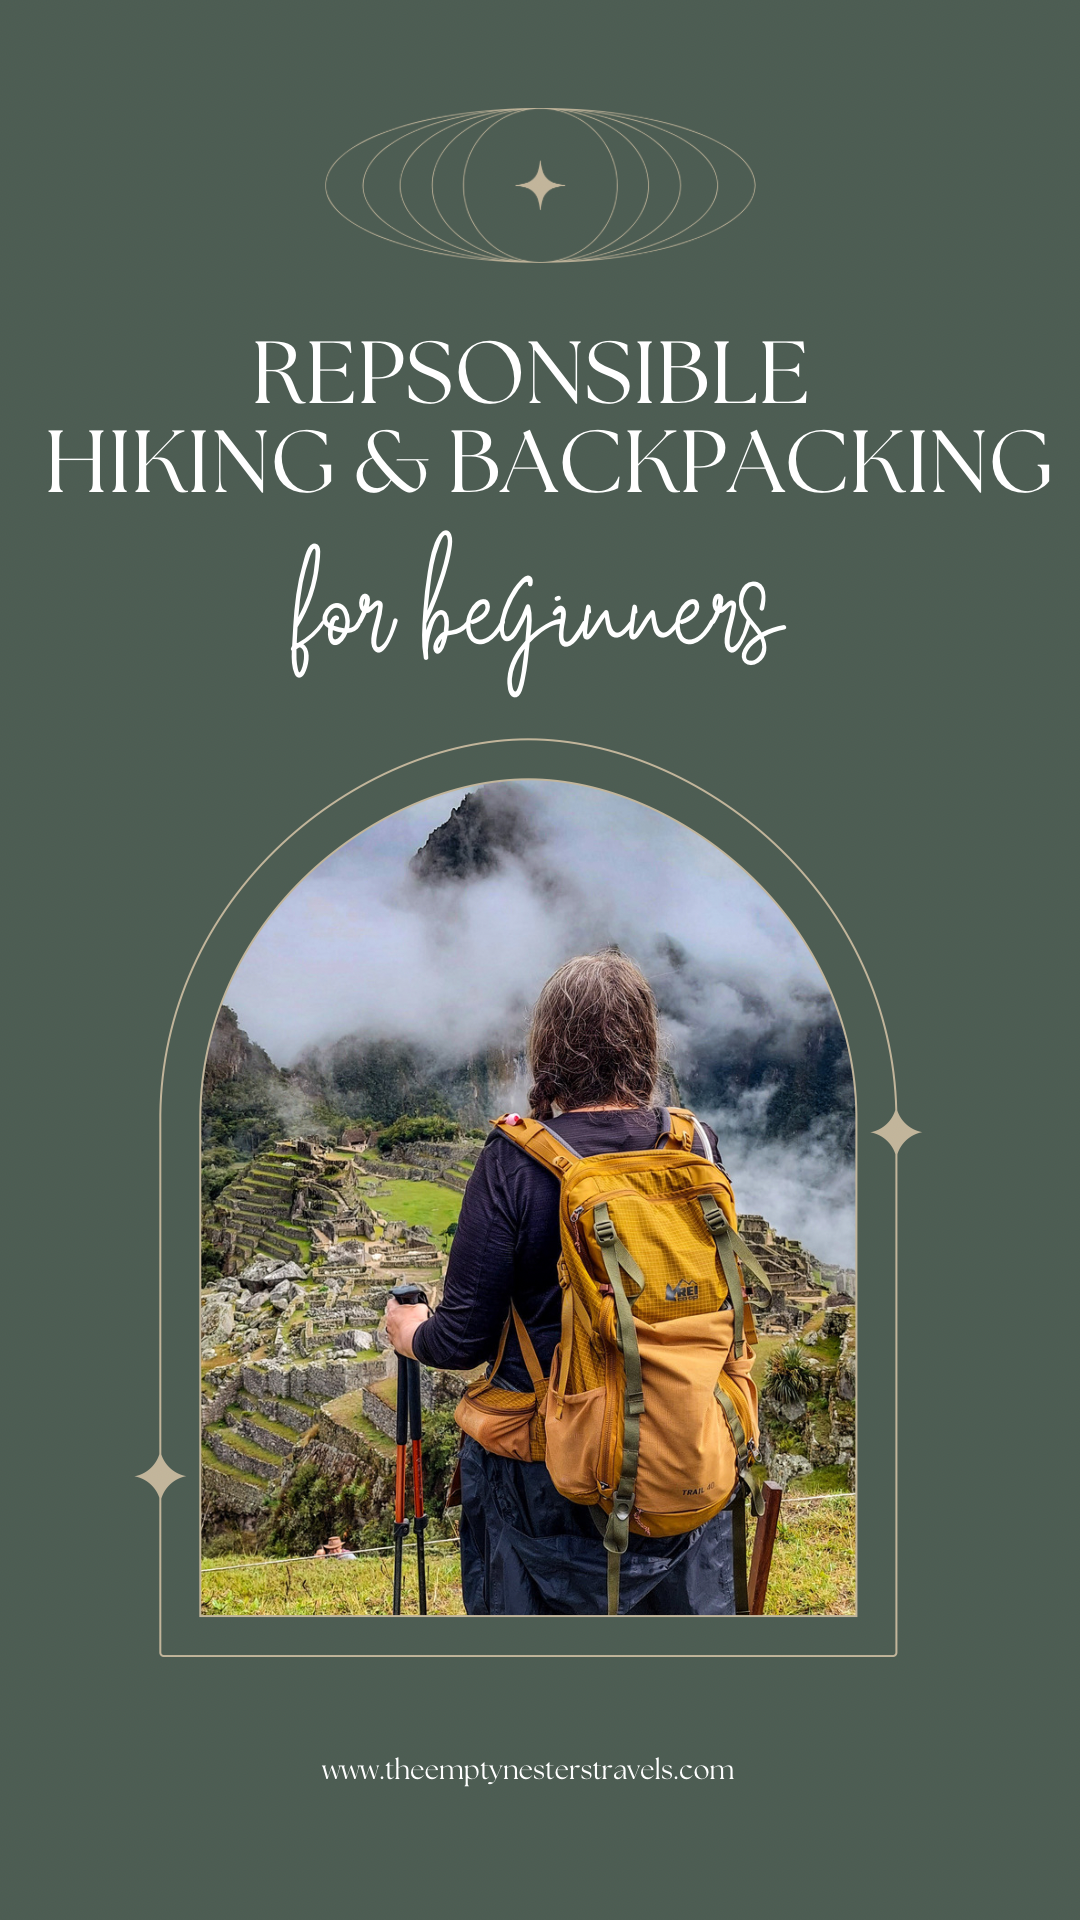 Treading Lightly: 7 Principles of Responsible Hiking and Backpacking